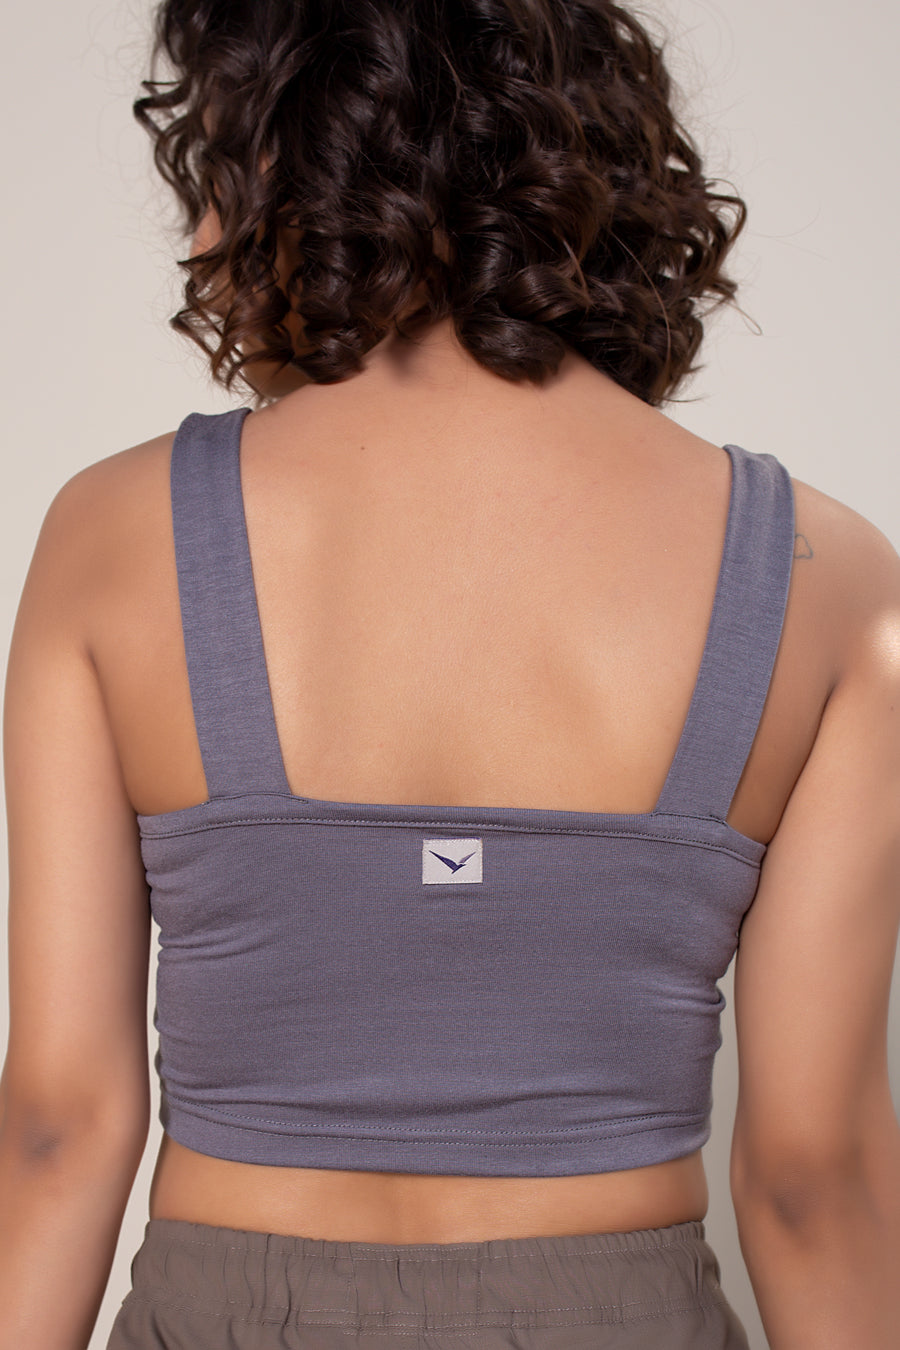 Women's Vera Crop in Charcoal | VOLO Apparel | The perfect athletic crop top made with a four way stretch bamboo fiber blend. Double lined and naturally odor resistant and antimicrobial. The Vera bamboo crop is reinforced stitched, the bamboo fiber comes with its own climate control properties, making the tops more breathable in the heat and more insulating in the cold.